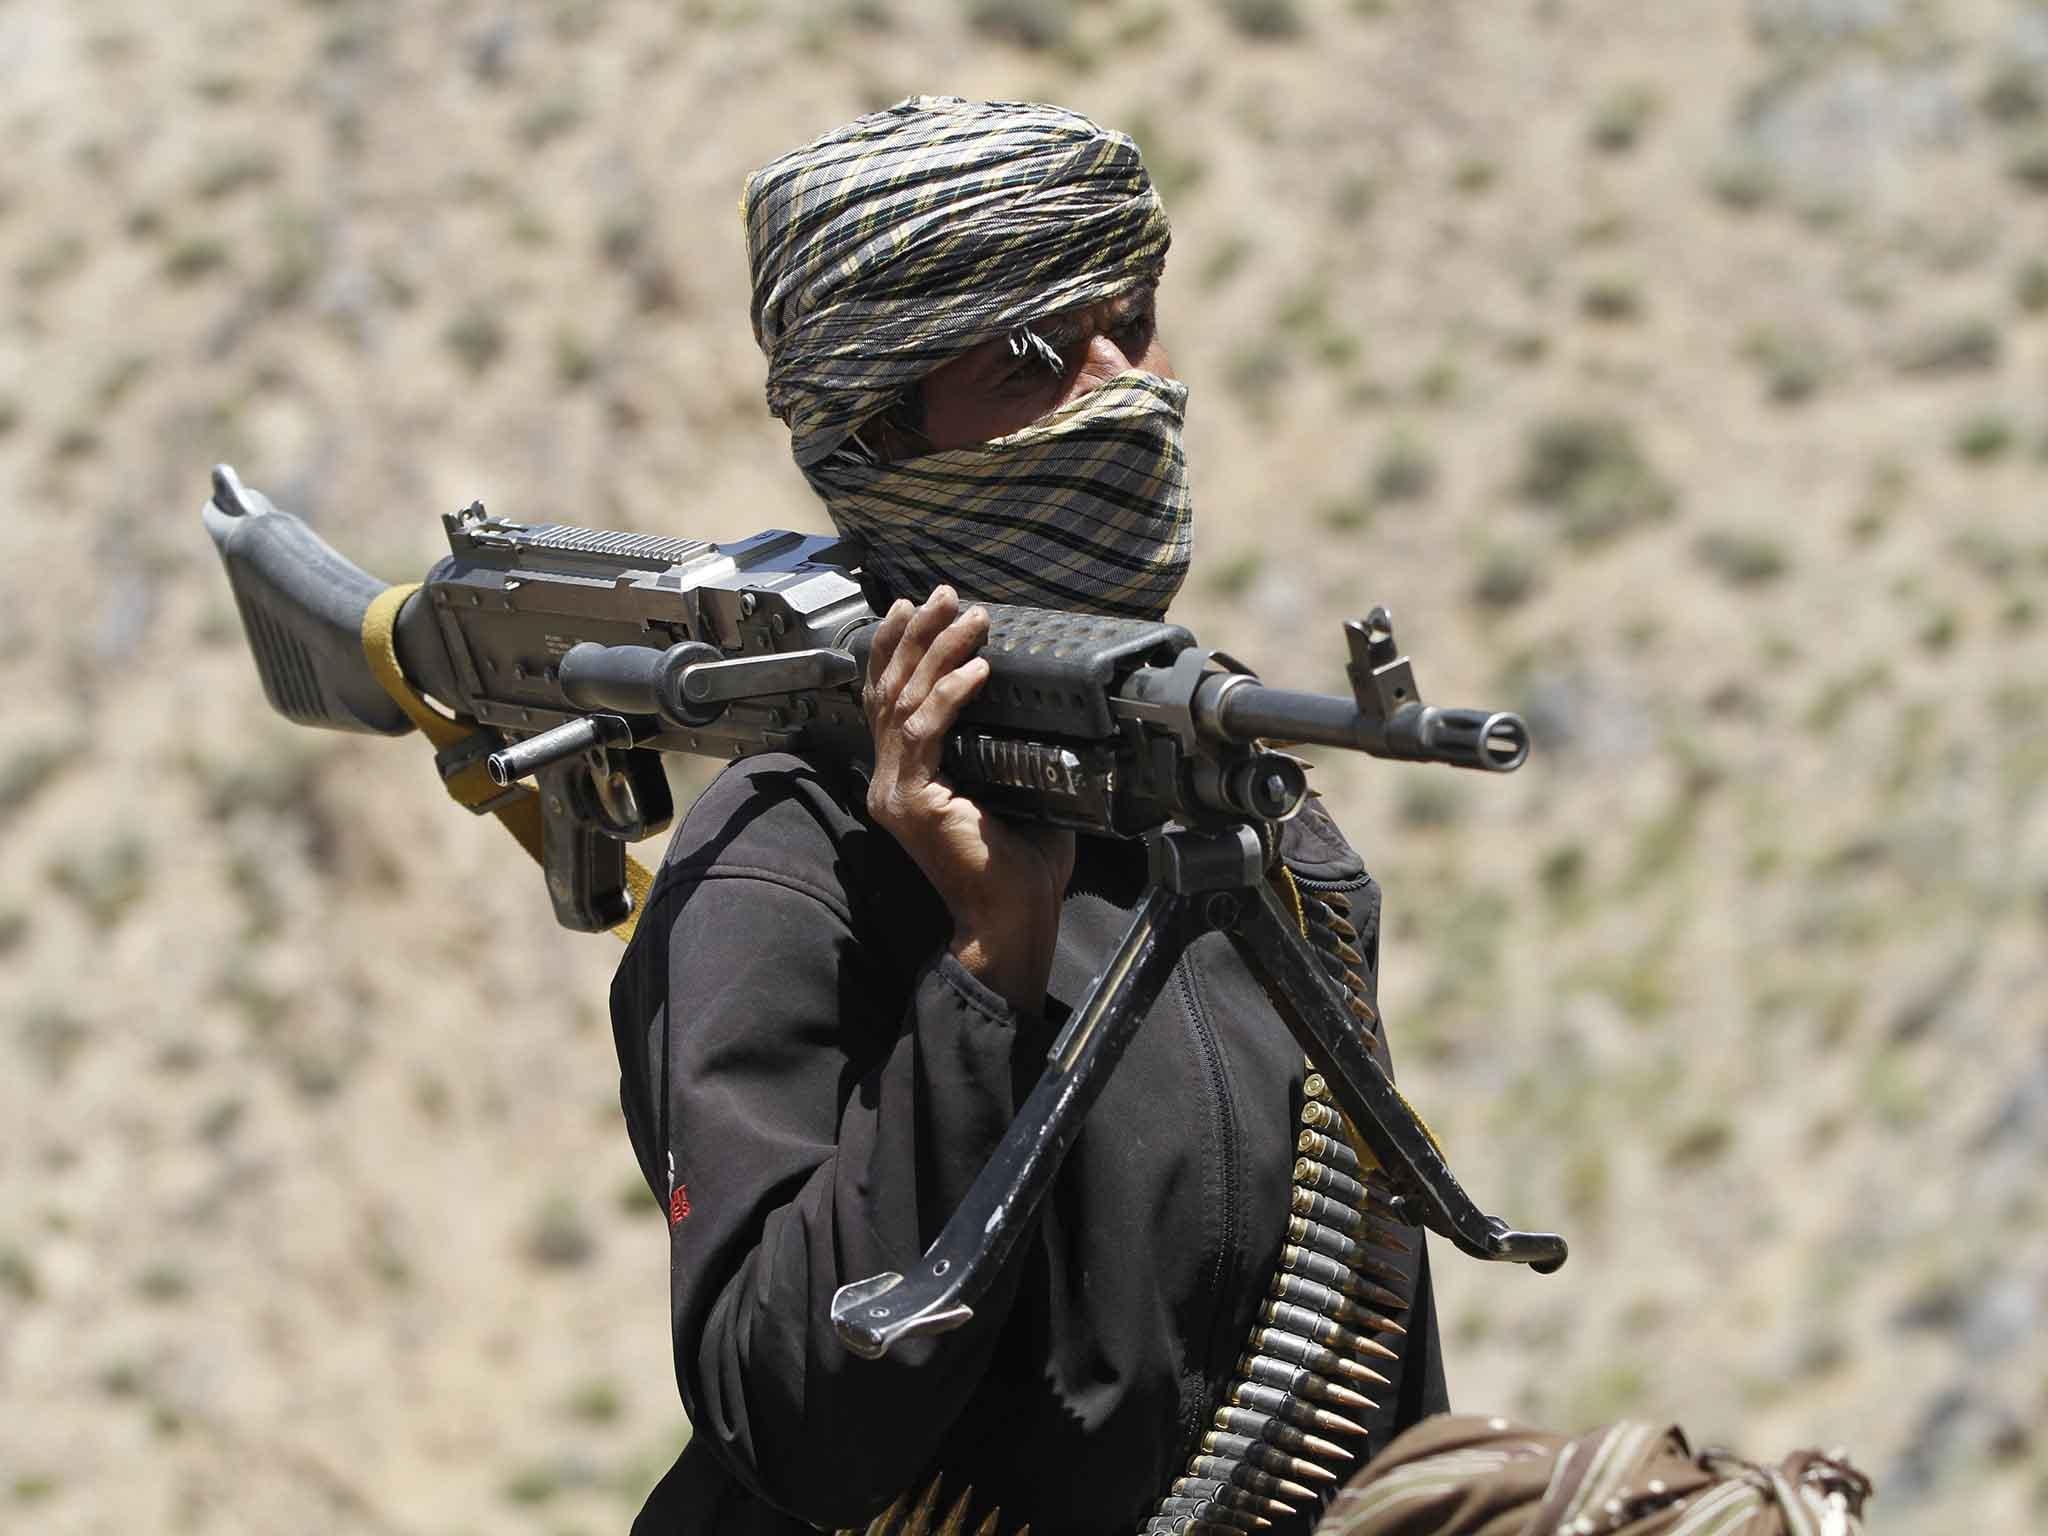 A member of a breakaway faction of the Taliban guards a gathering in Afghanistan (file photo)